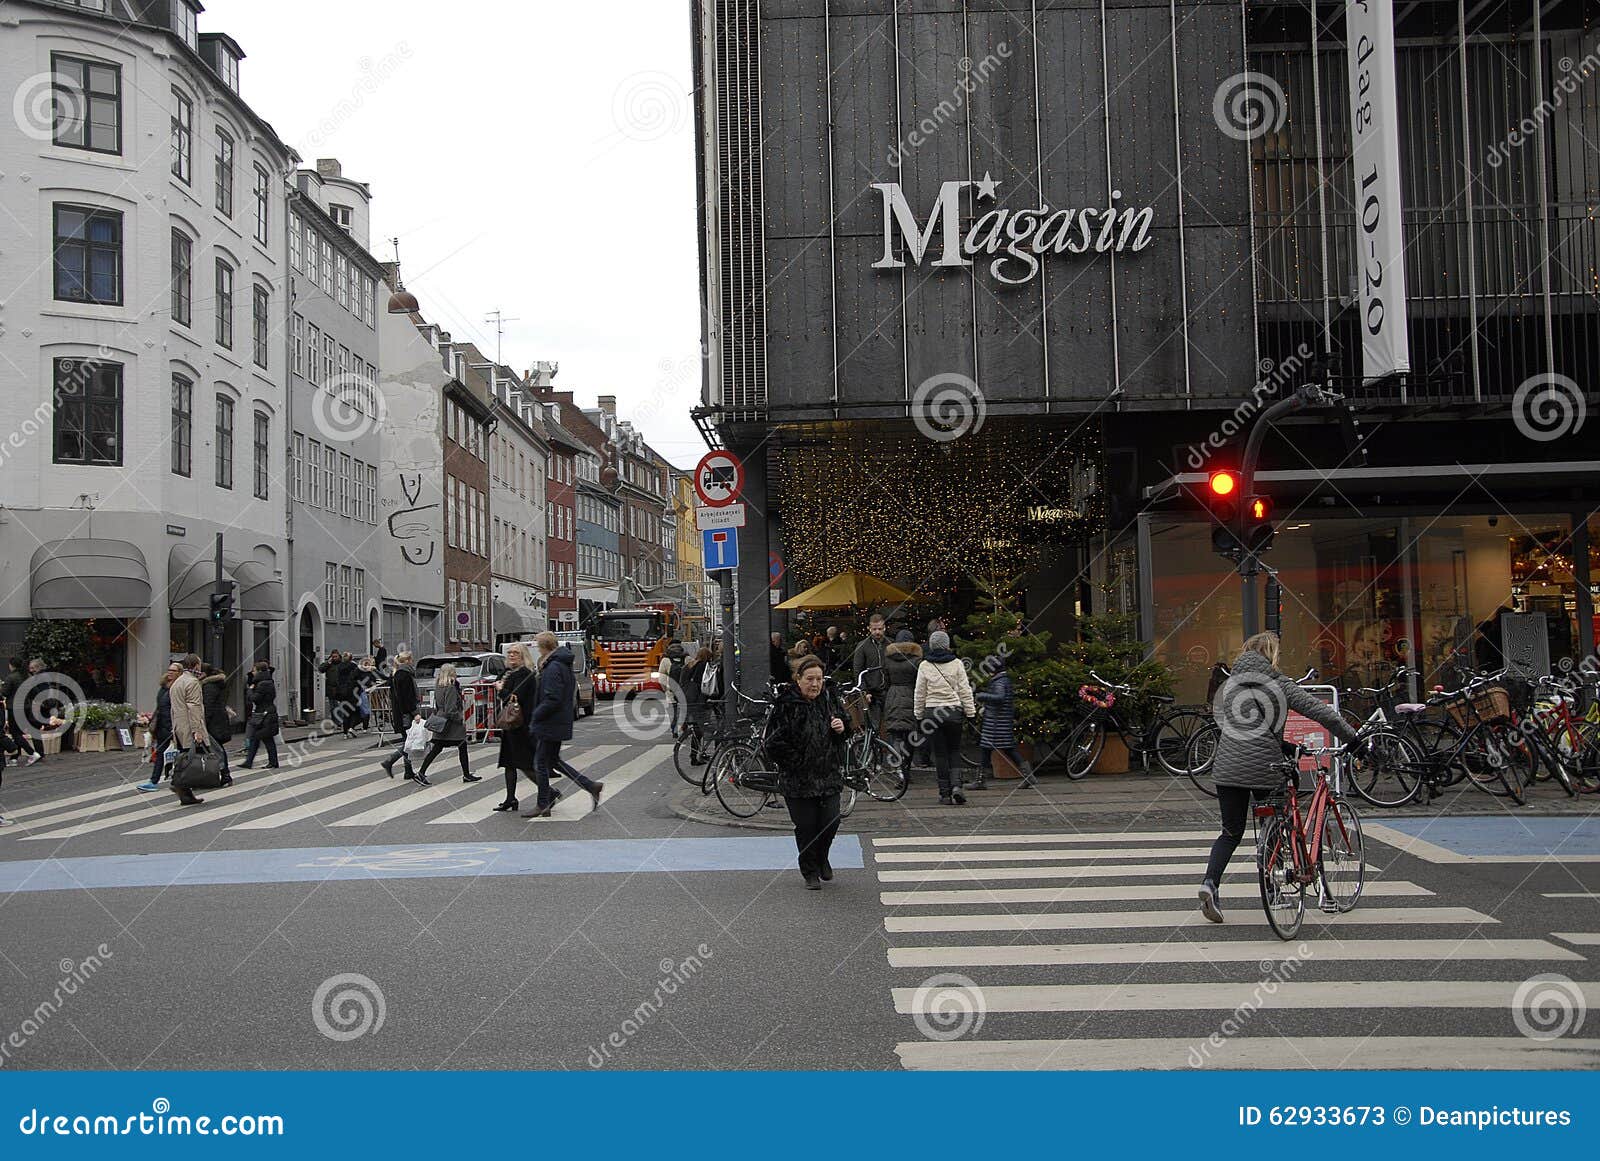 BLACK FRIDAY SHOPPERS editorial stock photo. Image of denmark - 62933673